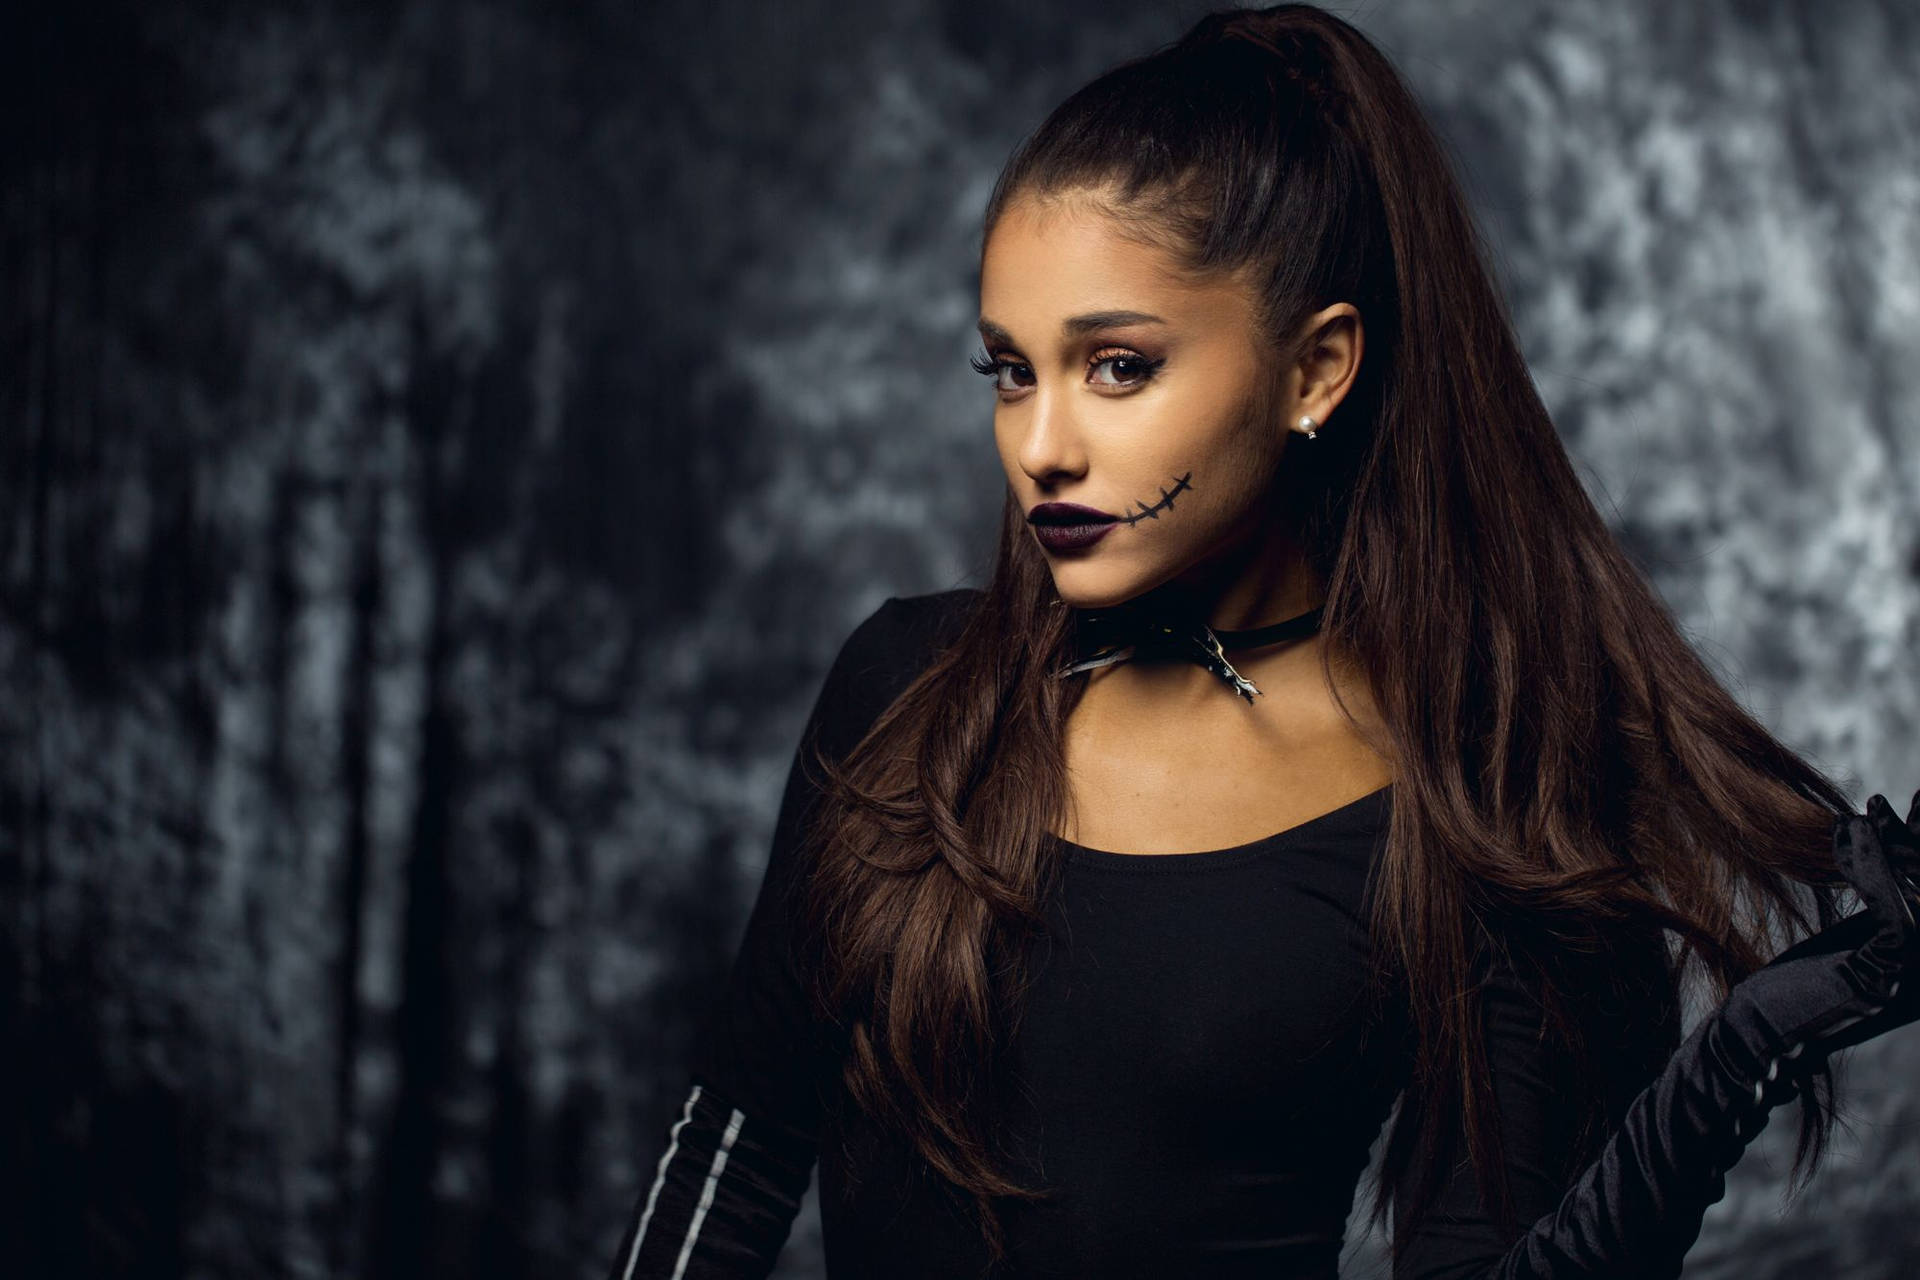 Make a statement this Halloween with Ariana Grande's chic witchy look! Wallpaper